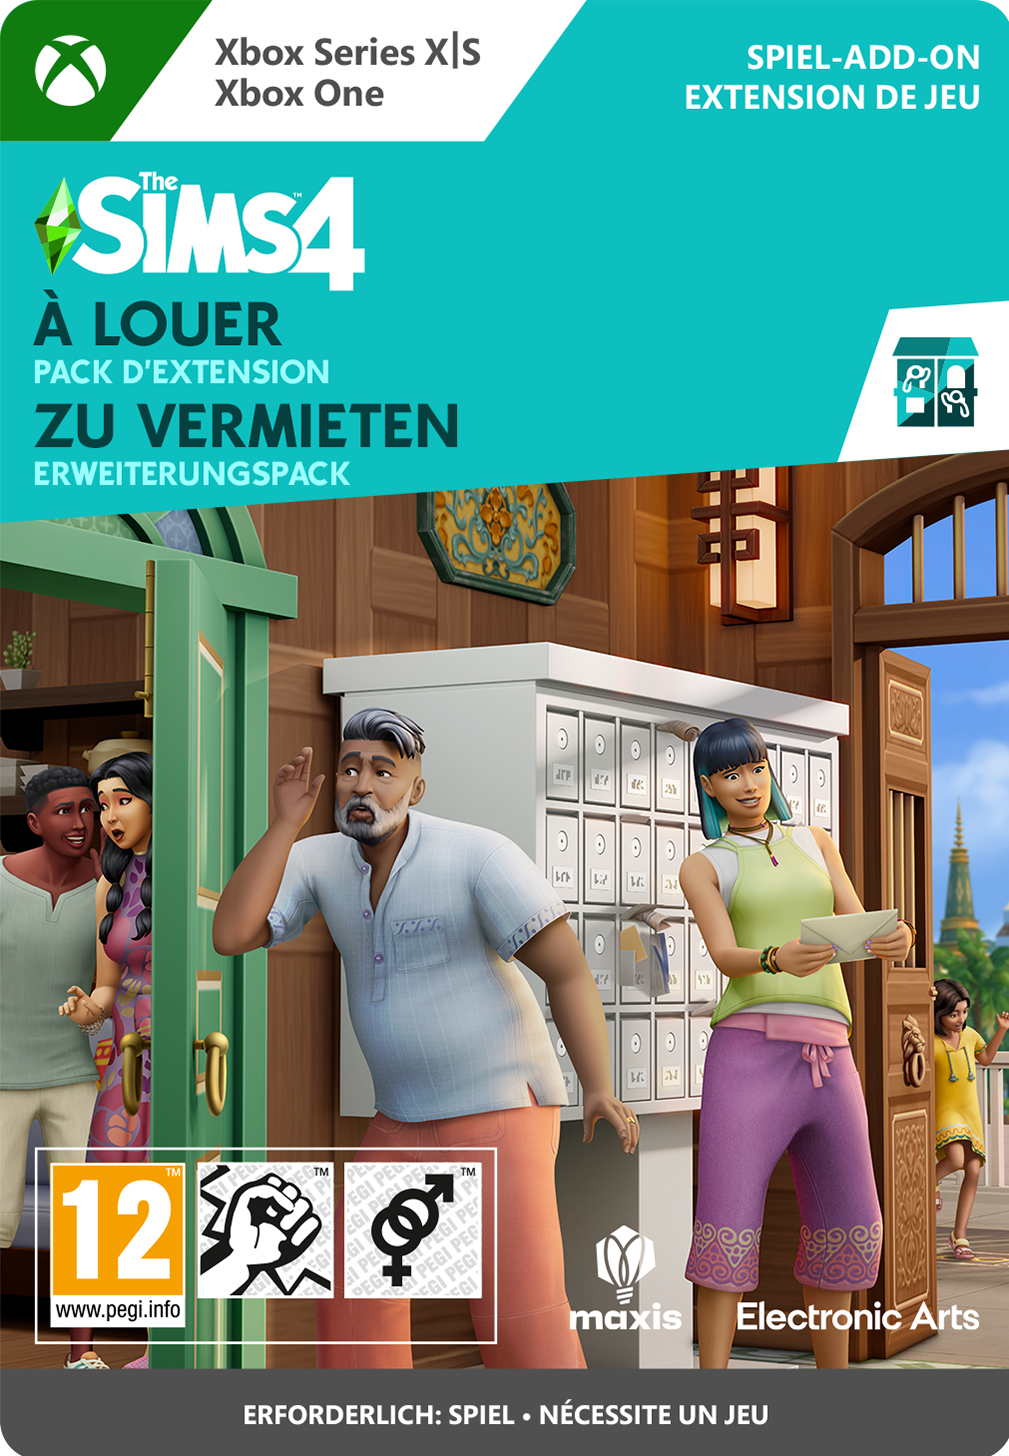 Xbox The Sims 4 For Rent Expansion Pack Download Code (Xbox) zum Sofortdownload